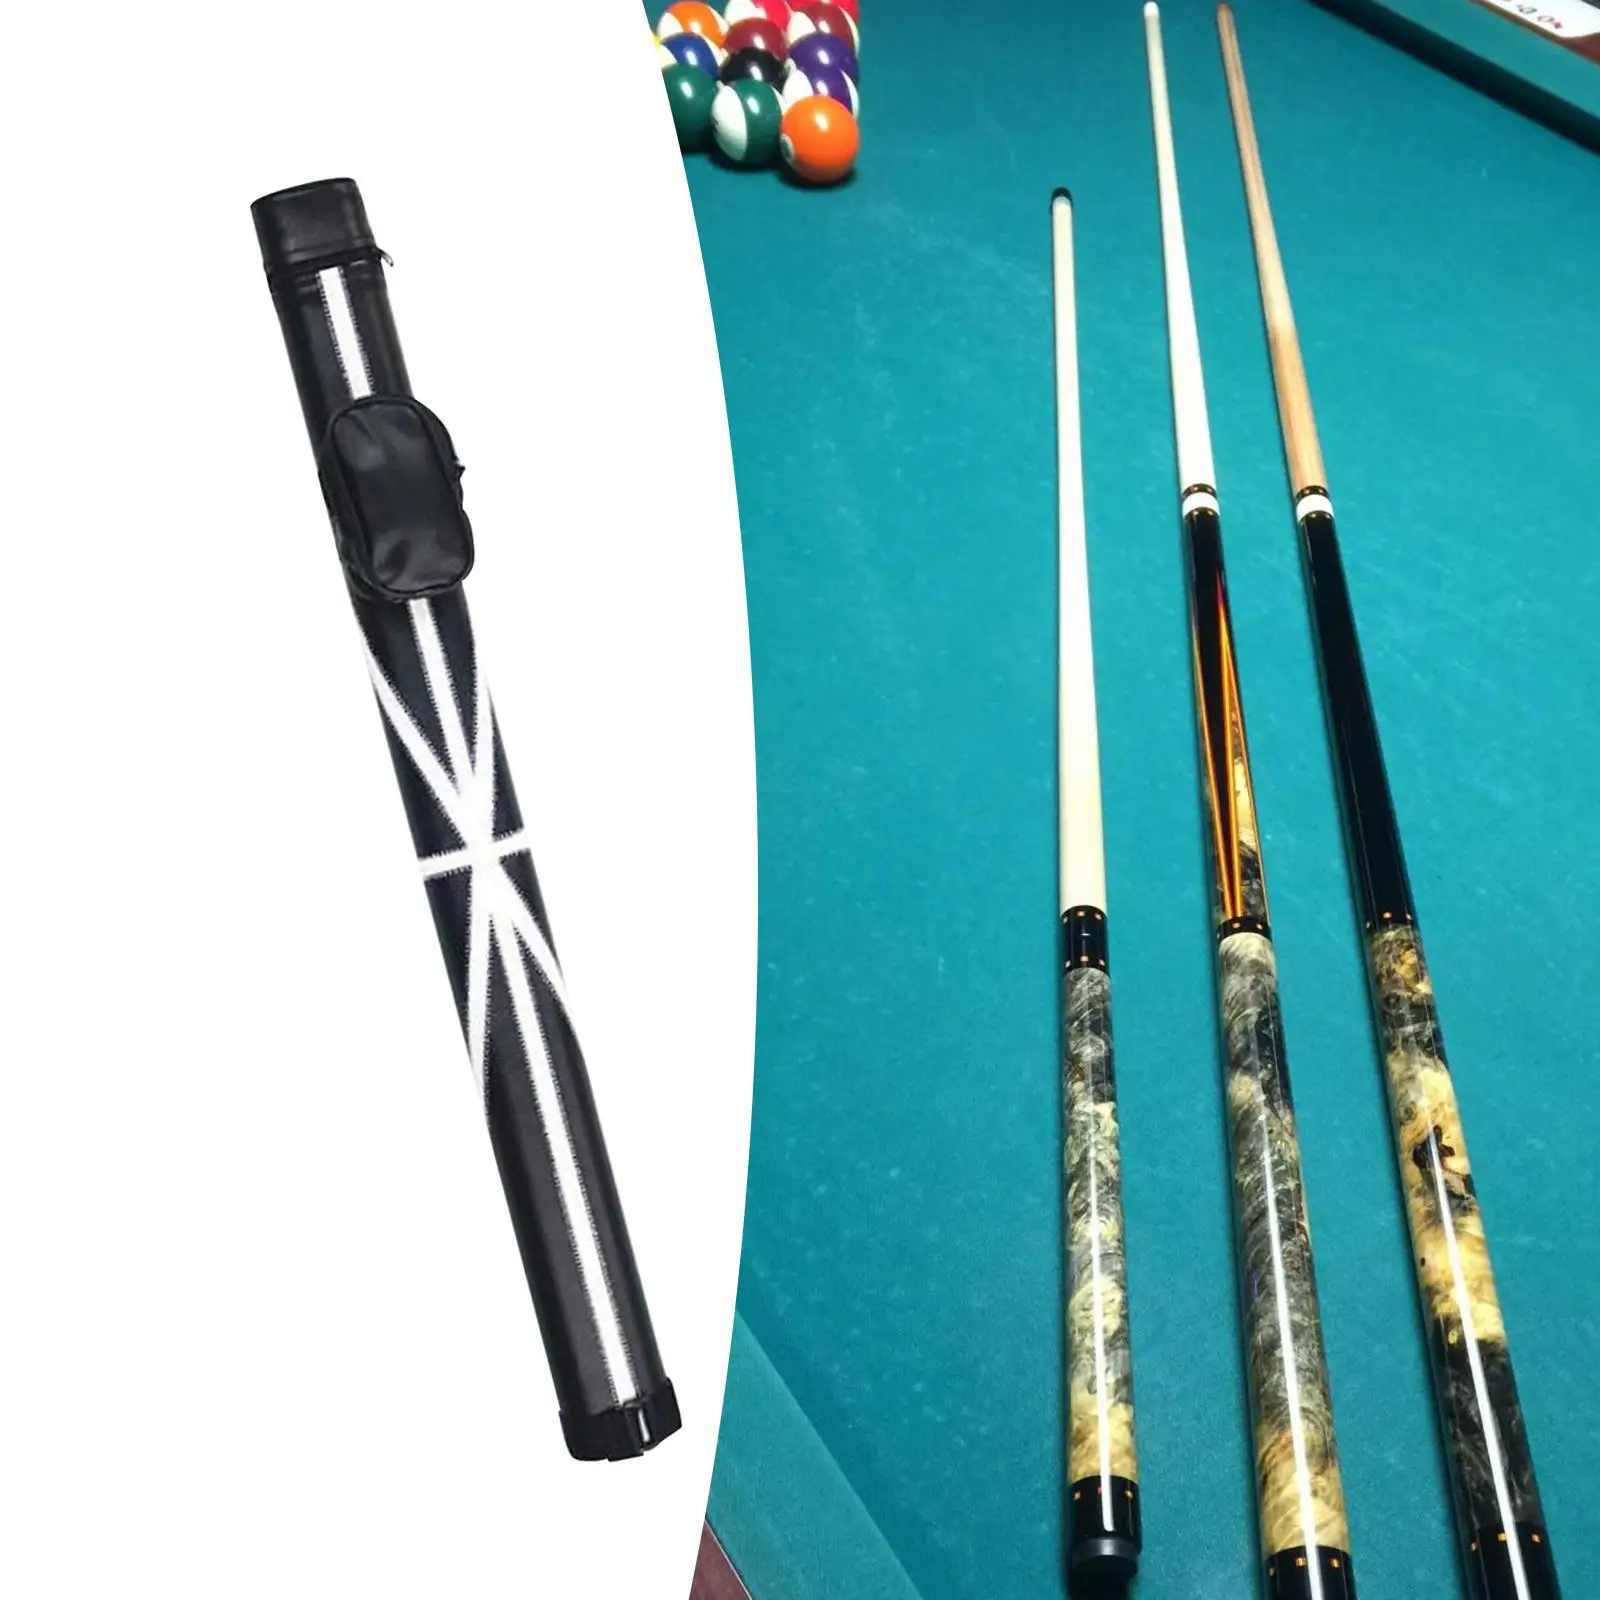 Pool Cue Case Billiard Pool Cue Stick Carrying Bag for Travel Snooker Club